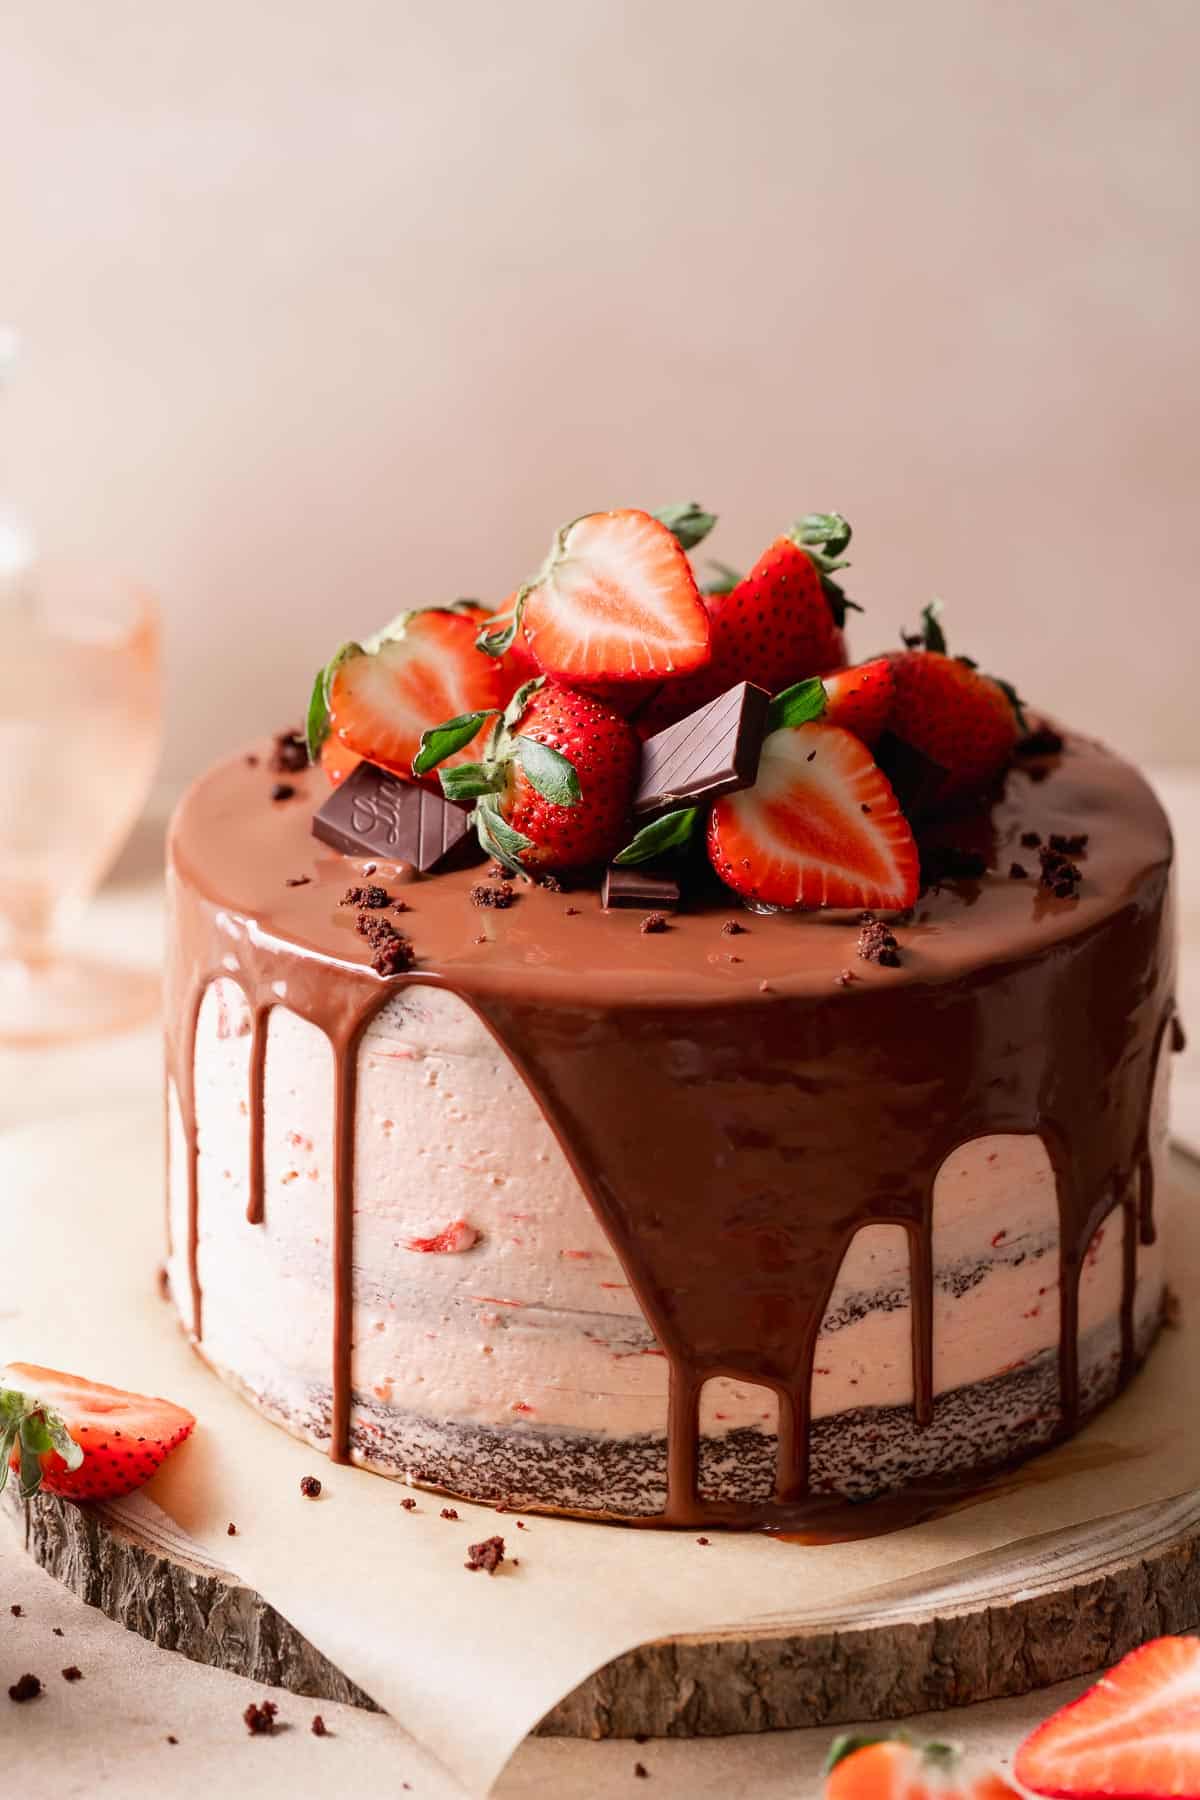 Chocolate strawberry cake with fresh strawberries and ganache on a wooden cake board.